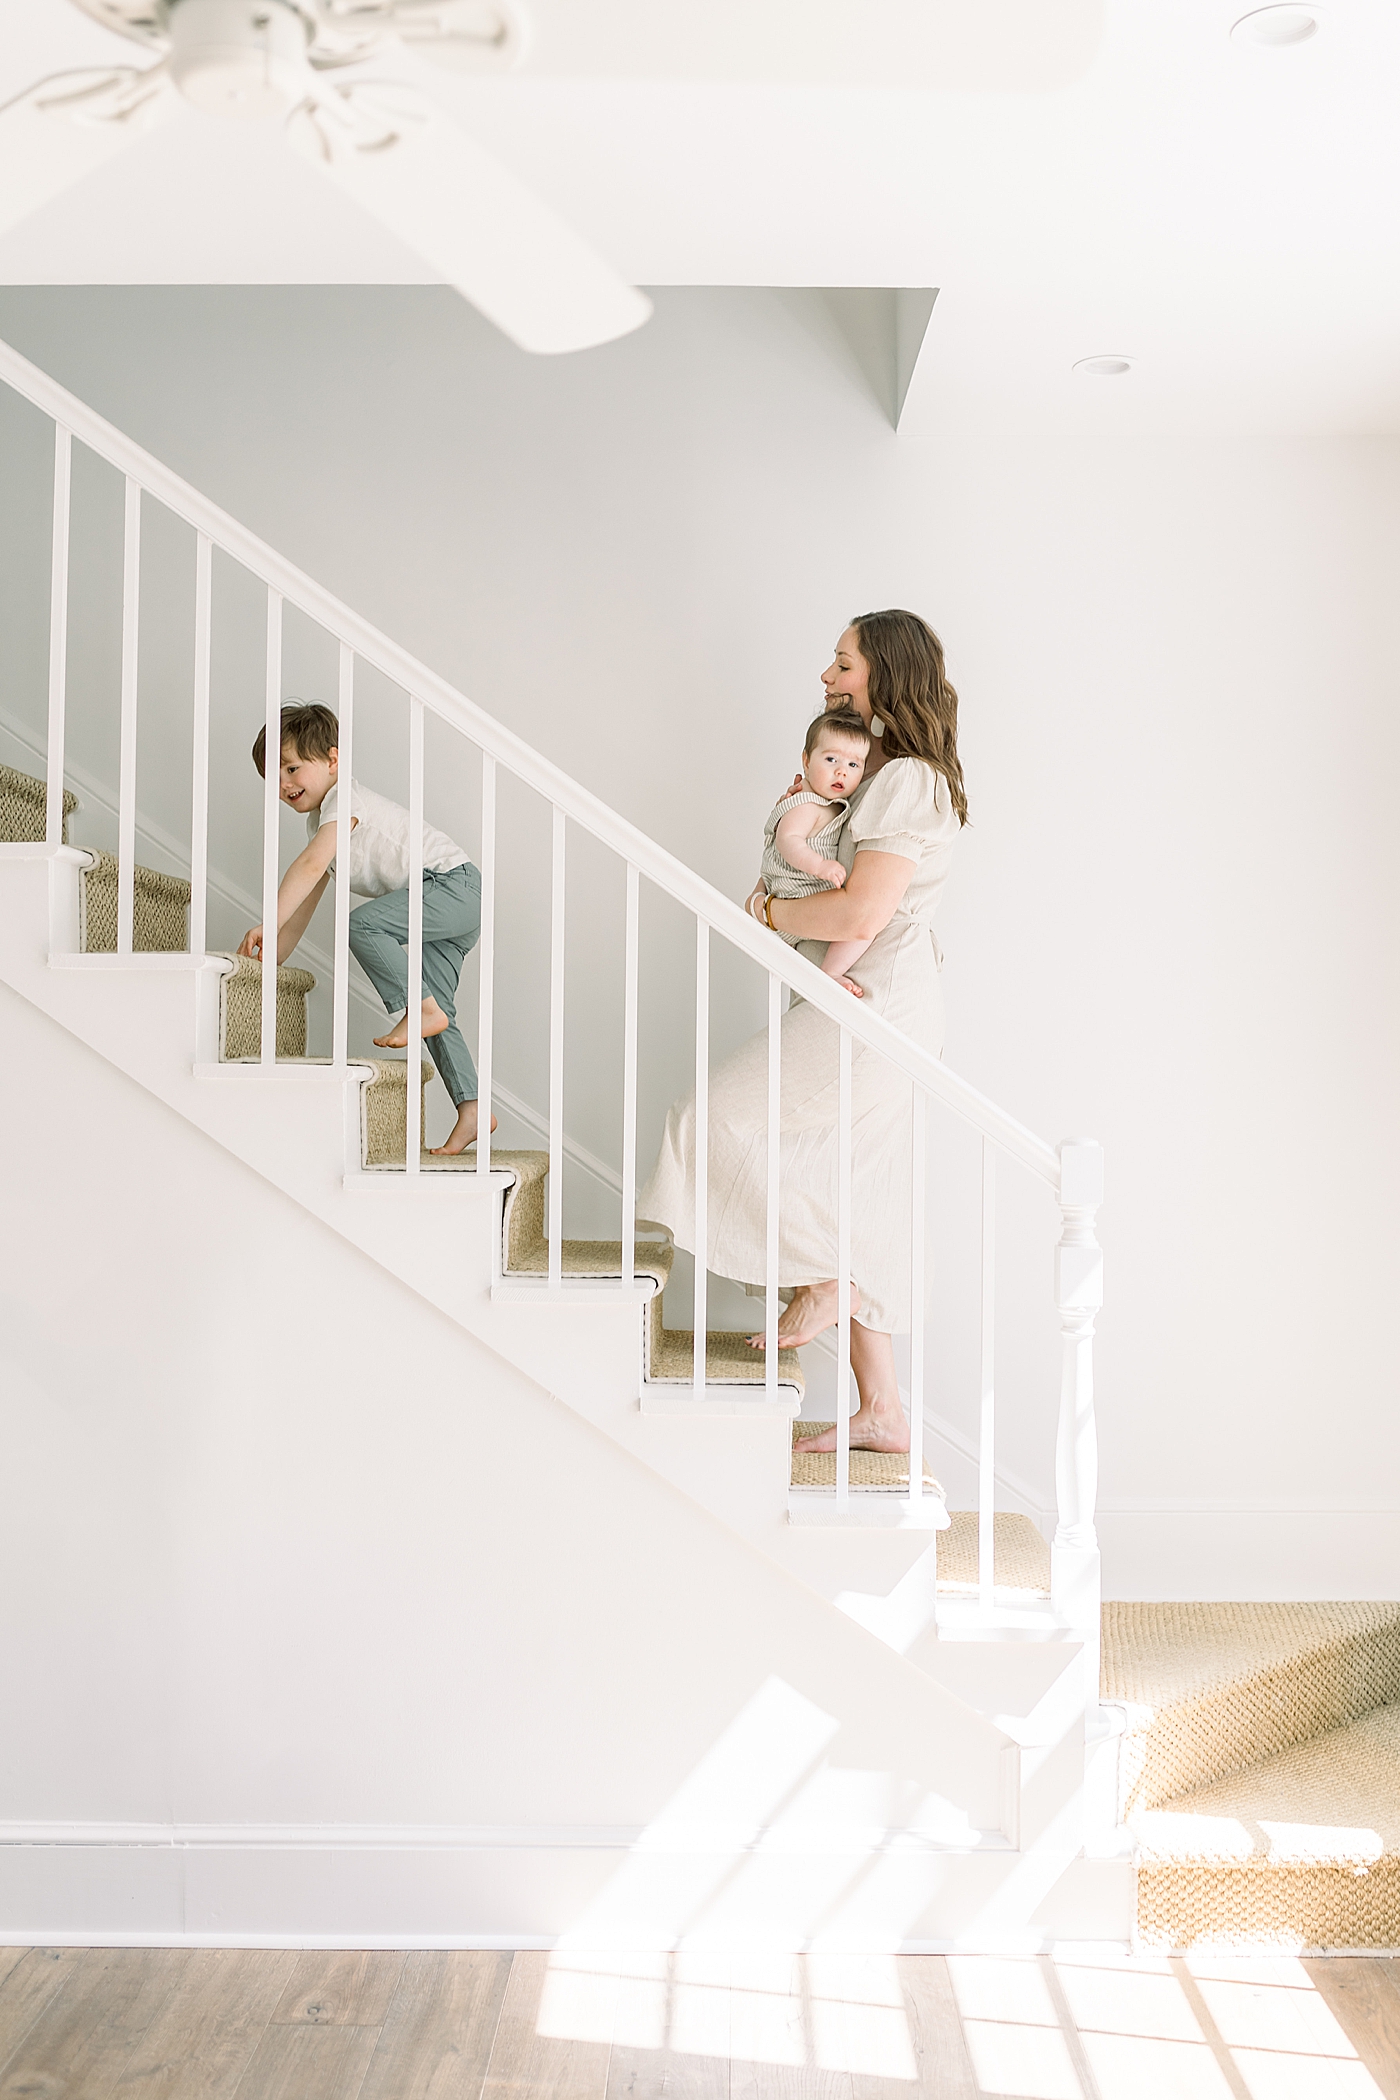 Mother with her two children going up a simple, white staircase | Image by Caitlyn Motycka 